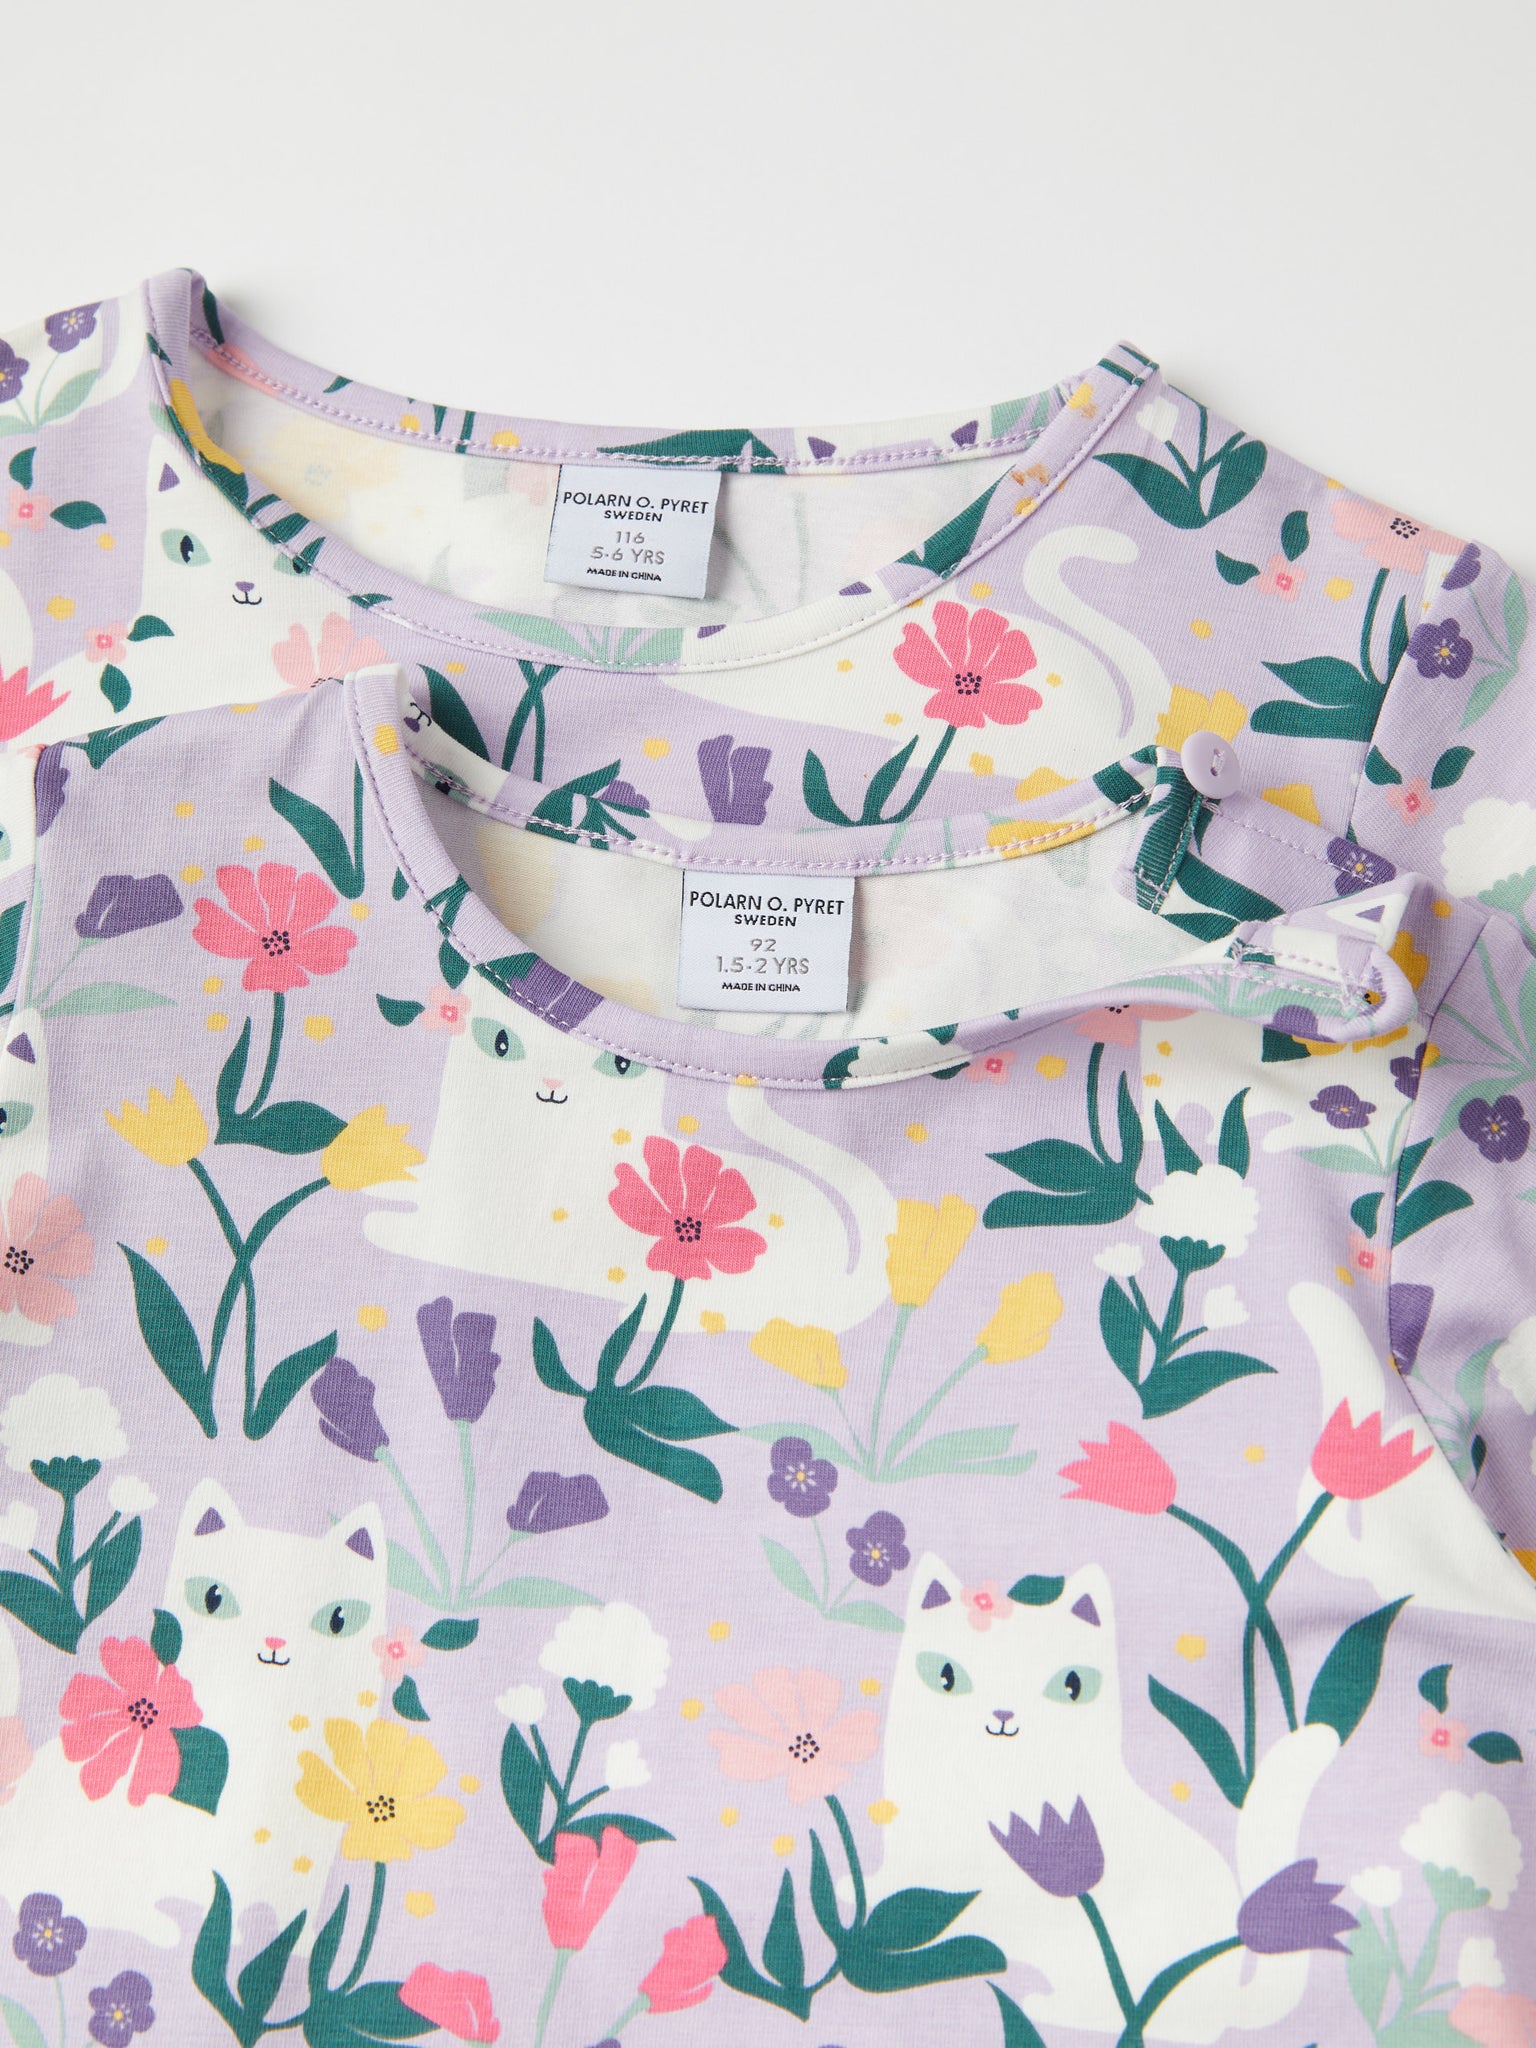 Cat Pocket Organic Cotton Kids Top from the Polarn O. Pyret kidswear collection. The best ethical kids clothes